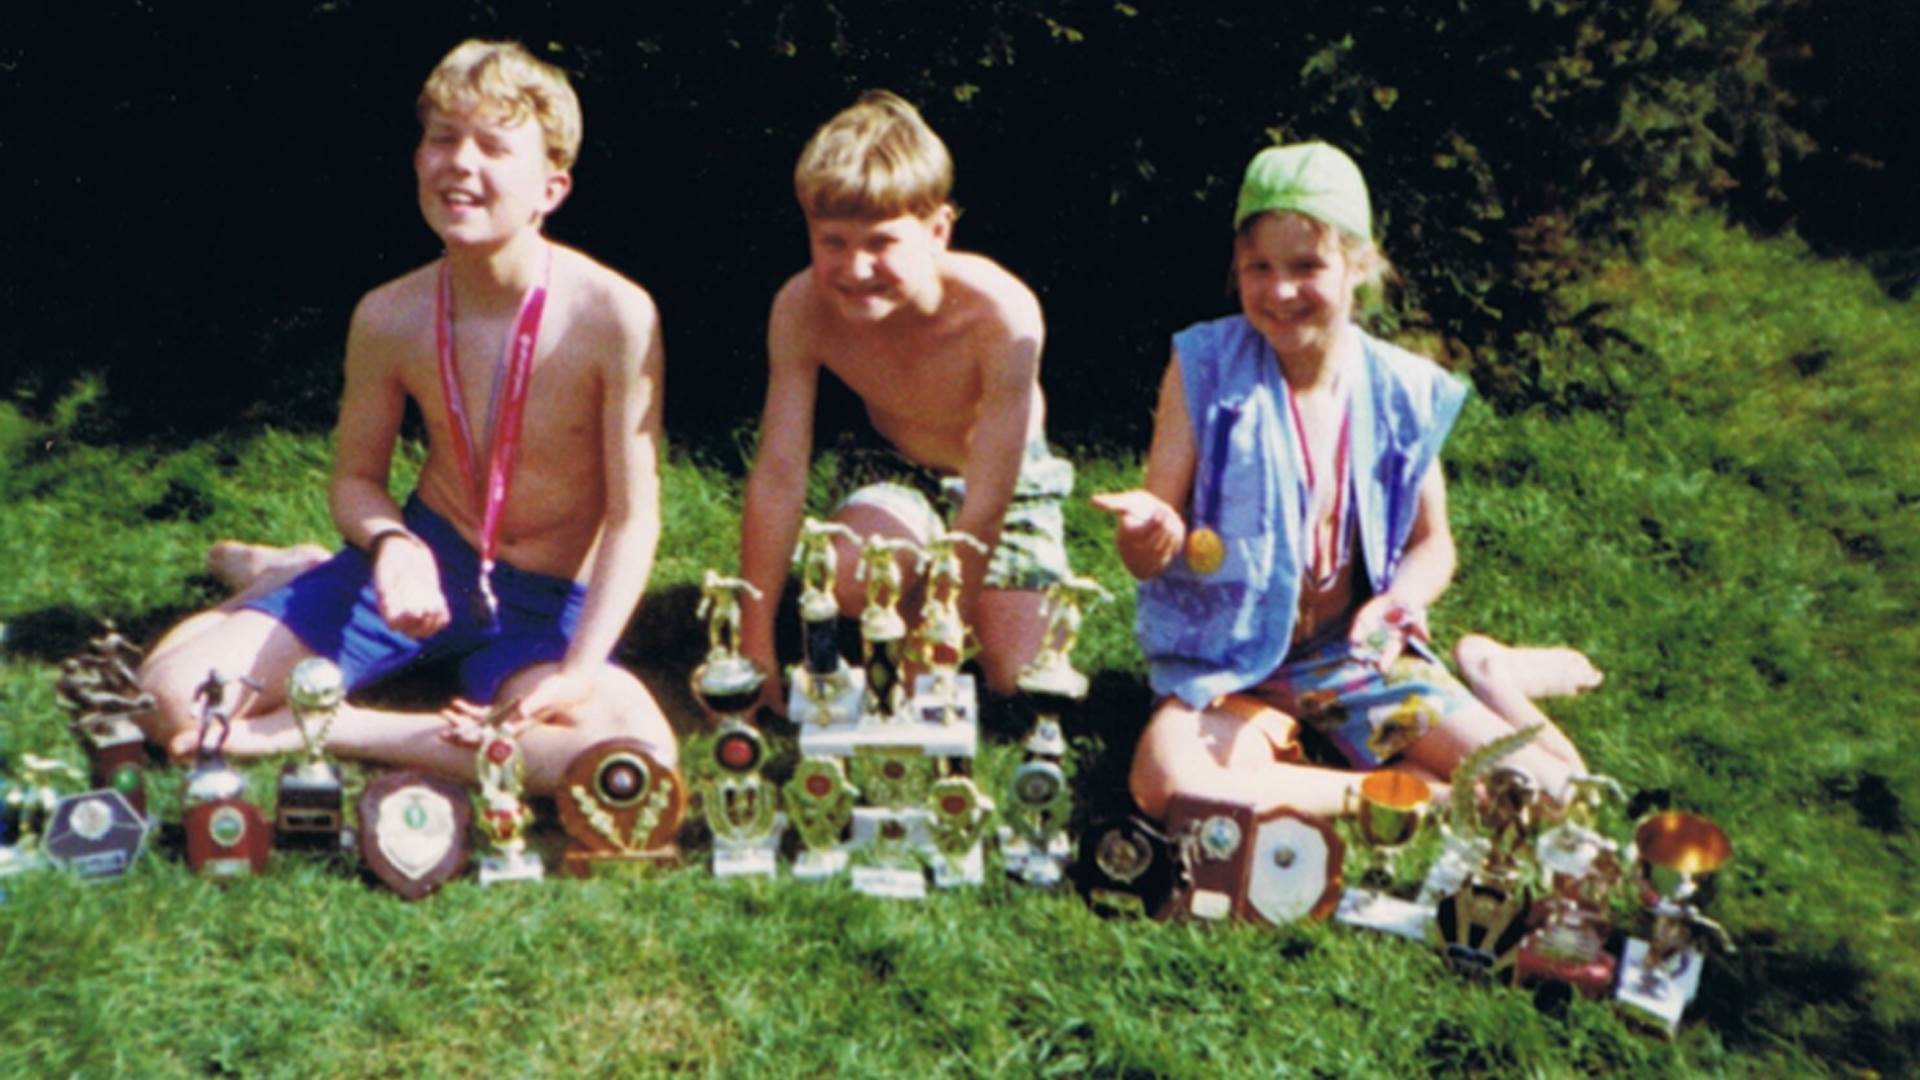 Anna McNuff and her brothers showing off their football trophies as children